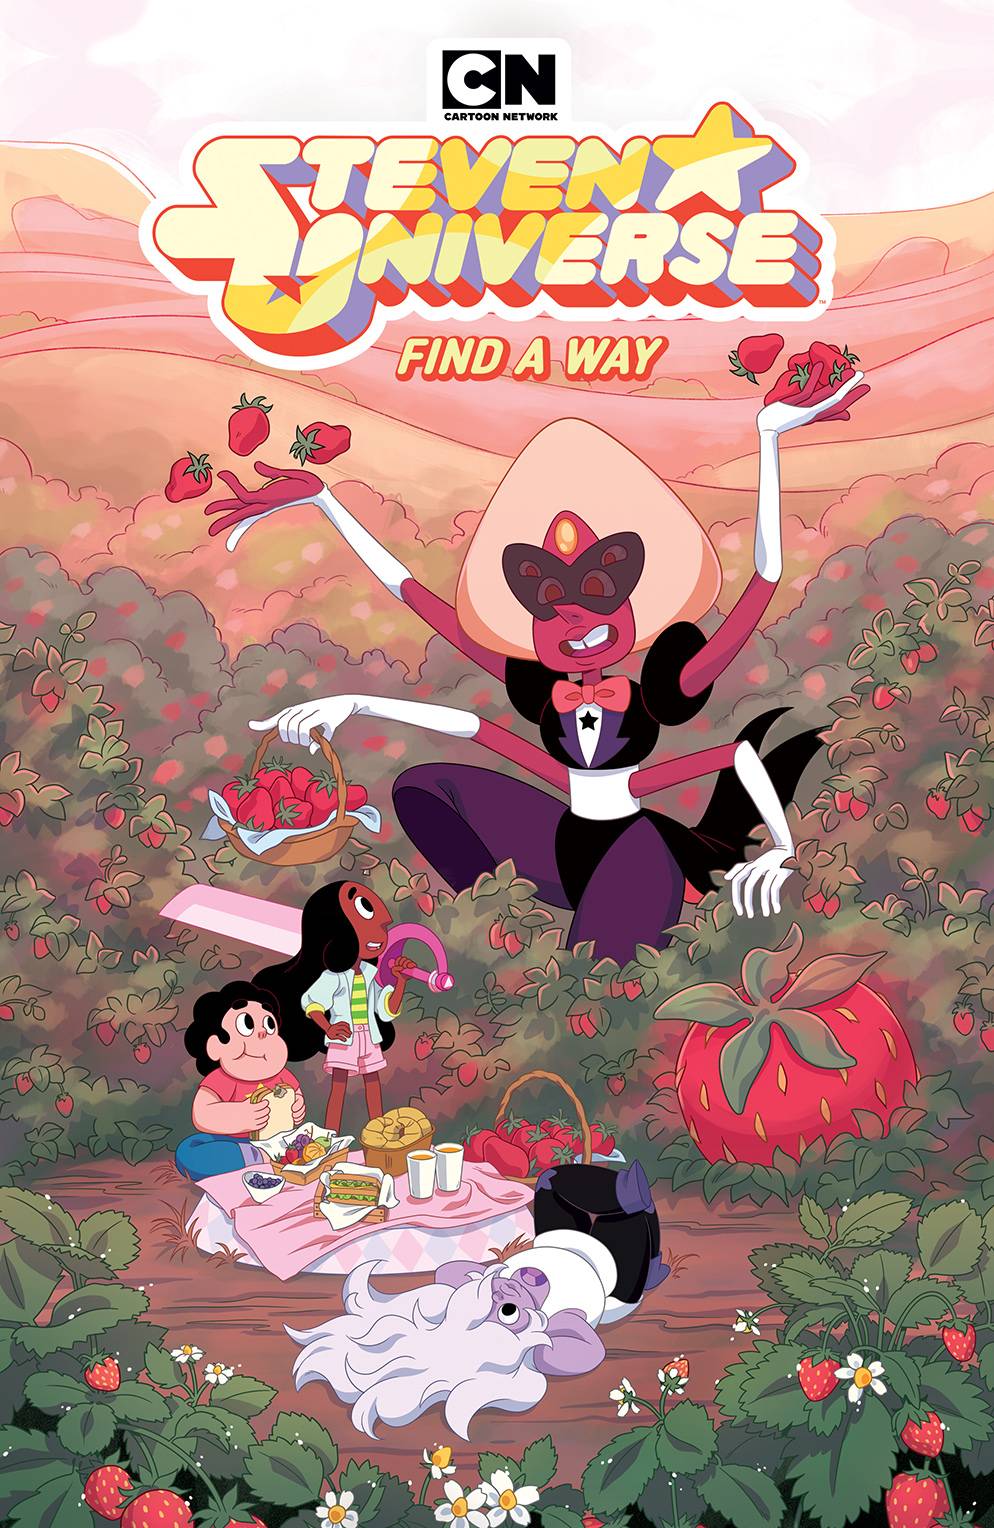 Steven Universe Ongoing Graphic Novel Volume 5 Find A Way